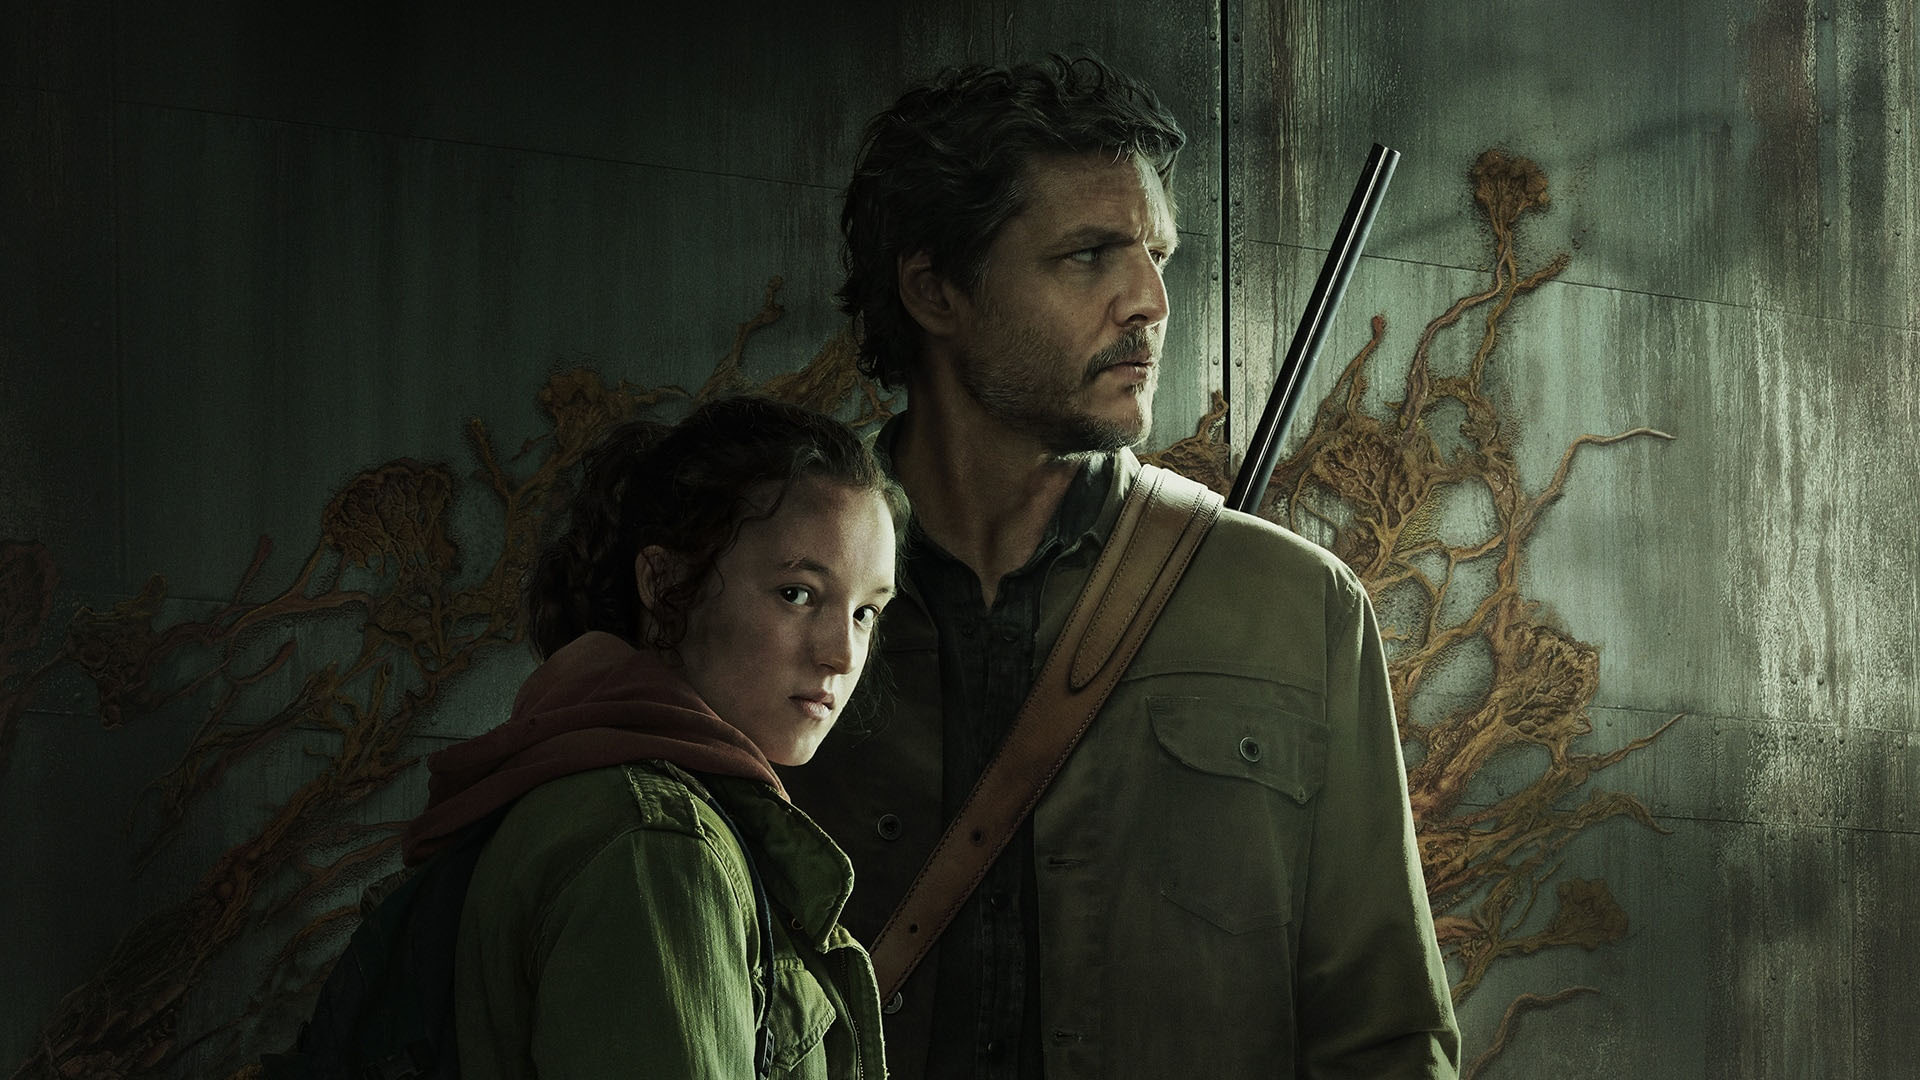 The Last of Us becomes one of HBO Max’s top streamed shows